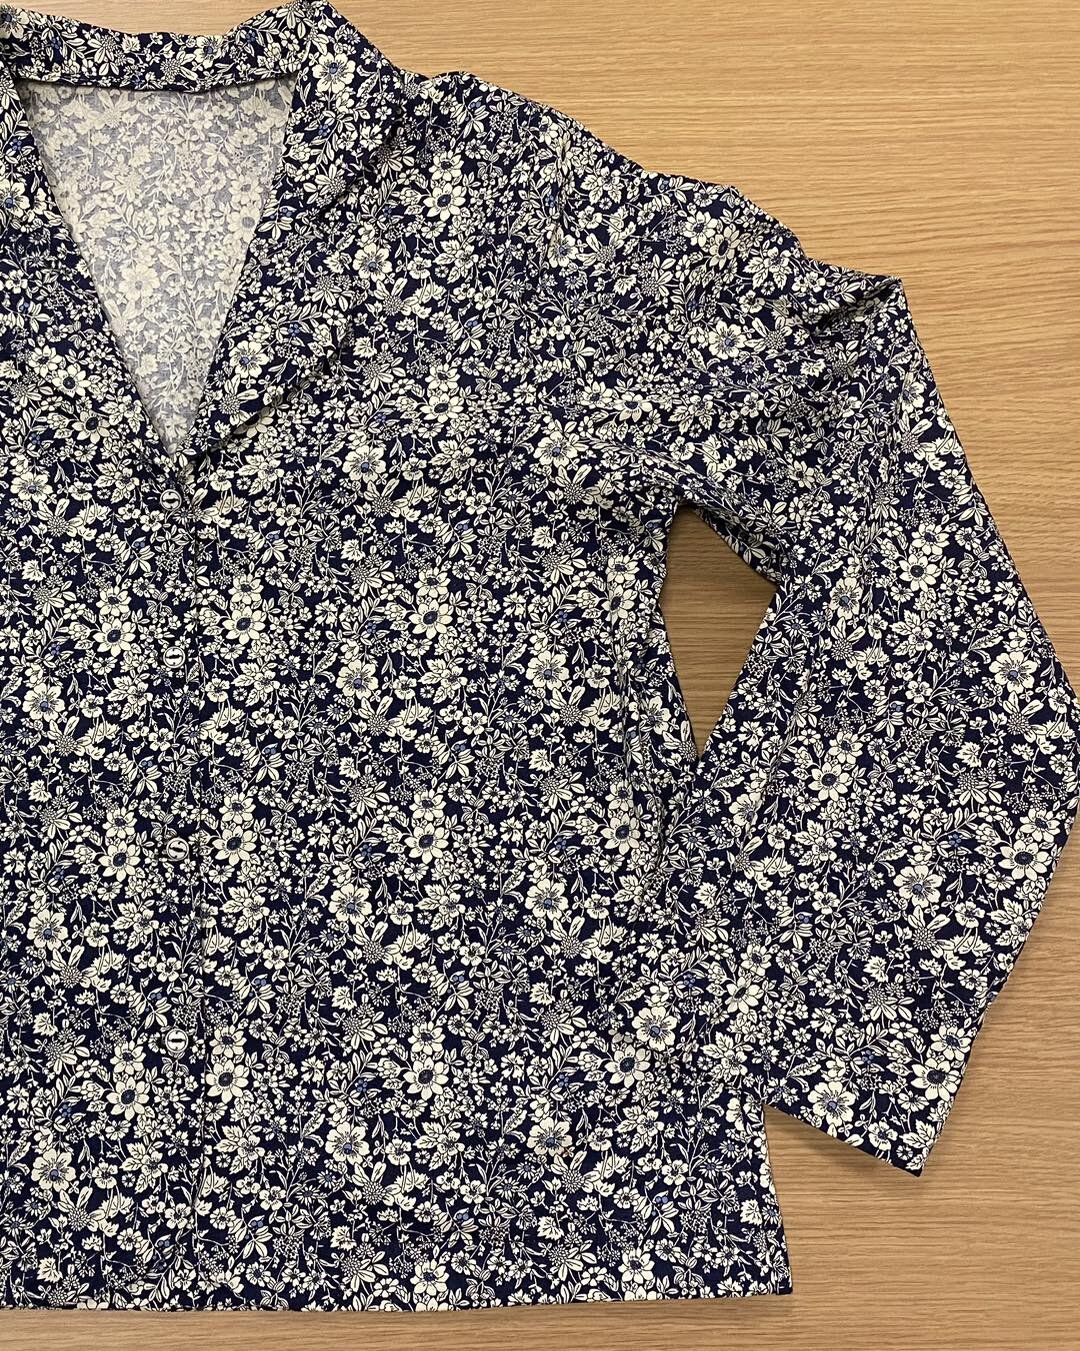 This is such a pretty make by Rosemary, a blouse made from navy floral print cotton. It has so many firsts for her, an a lot of consolidating her skills too. She has worked a collar, applied binding, put in button holes and sewn on buttons. A fabulou